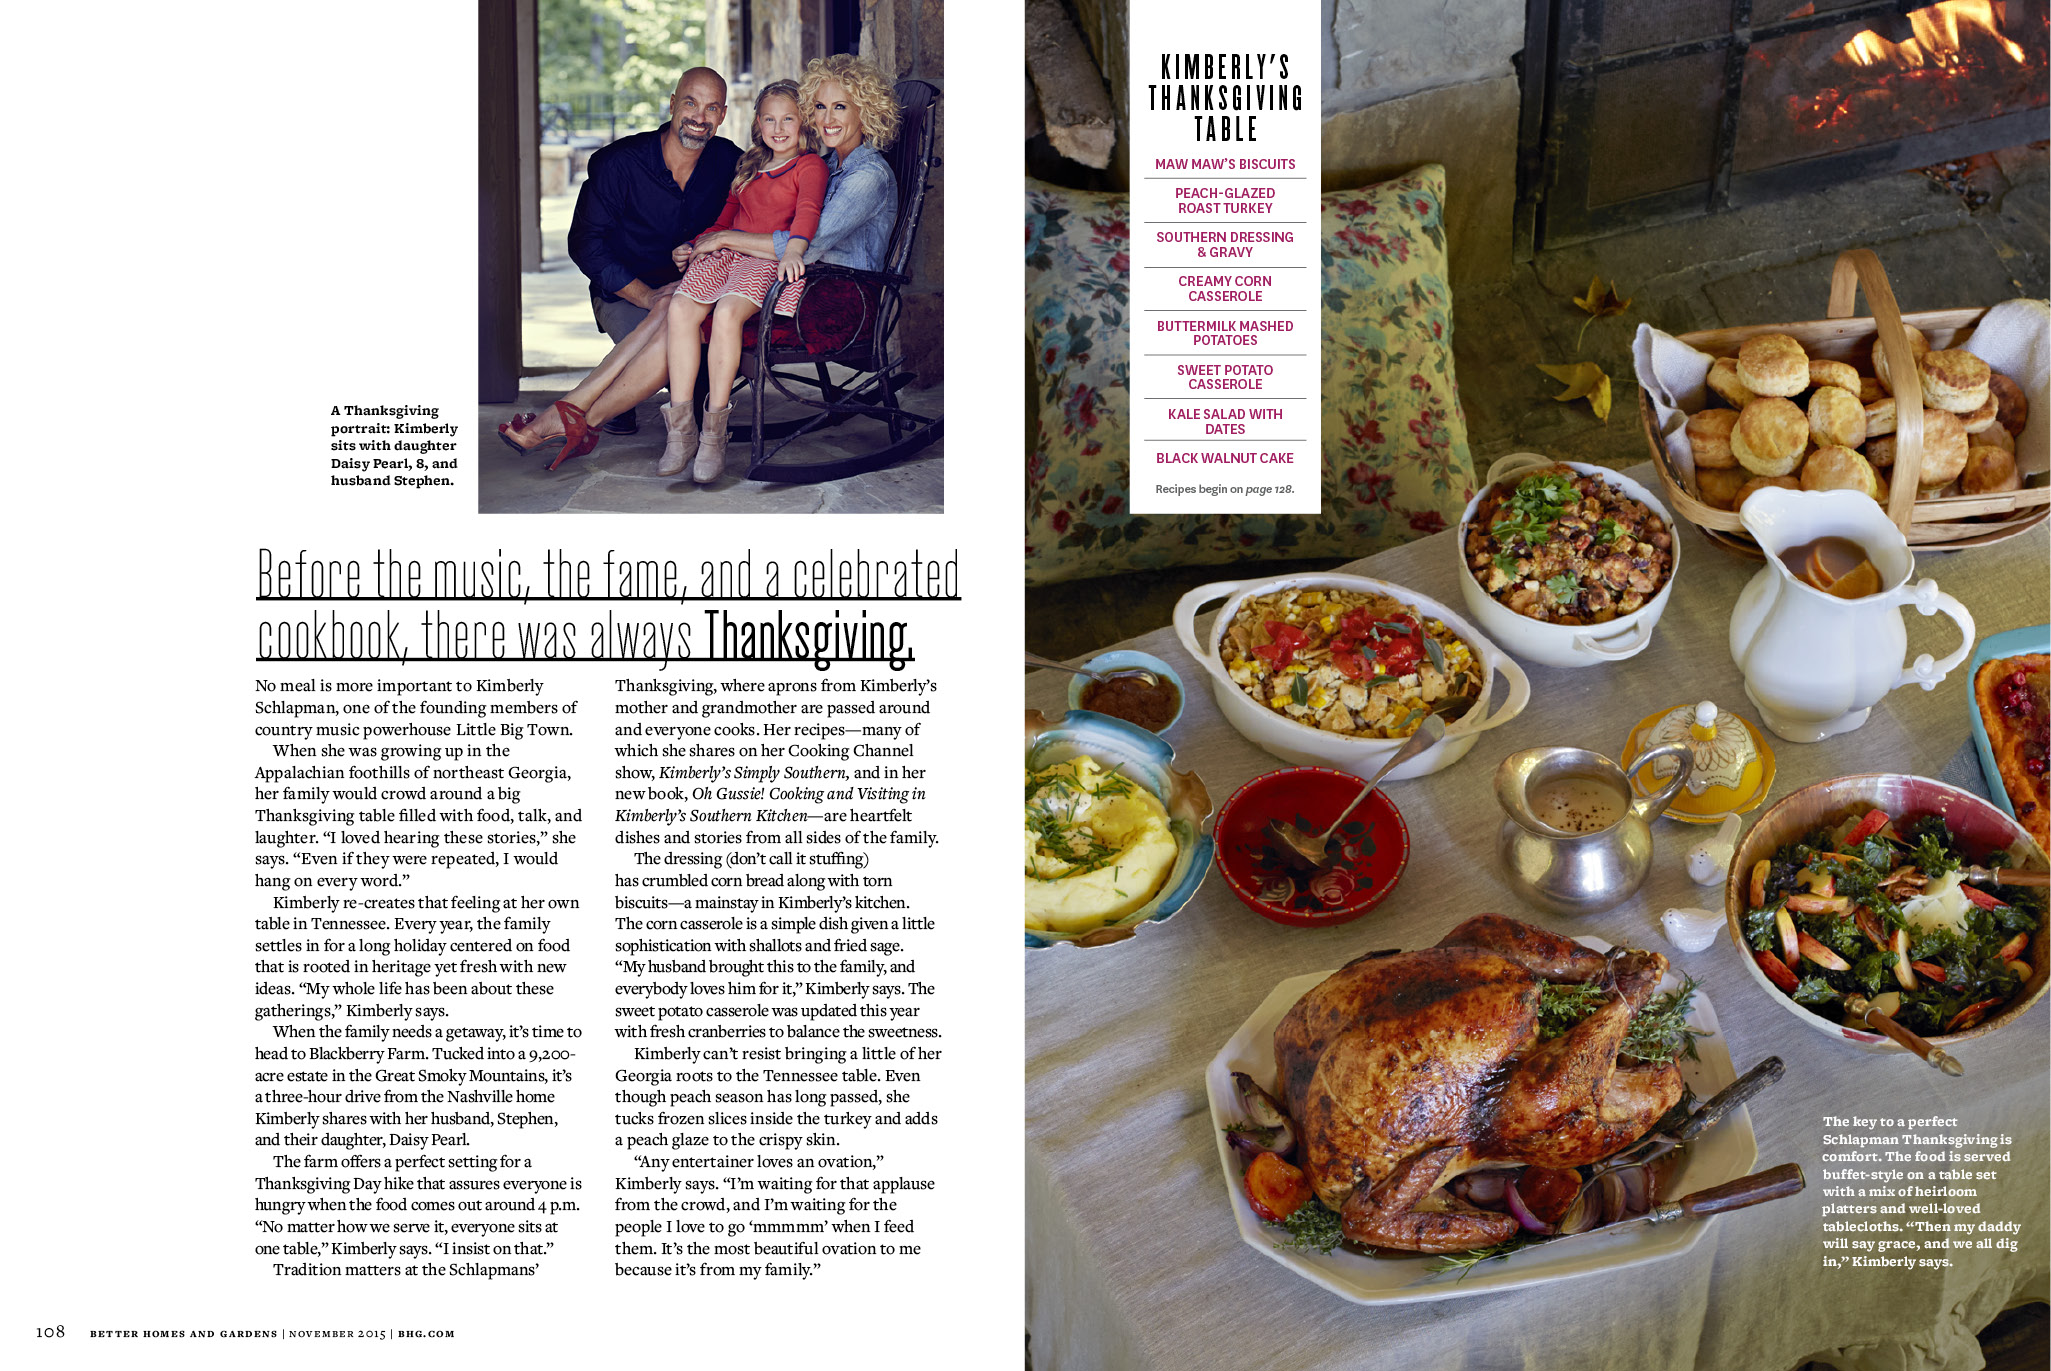 <strong>Little Town, Big Thanks, Better Homes & Gardens Magazine</strong><br />Words: Kim Severson | Photos: Con Poulos | Recipes: Kimberly Schlapman | Food Styling: Simon Andrews | Prop Styling: Sarah Cave